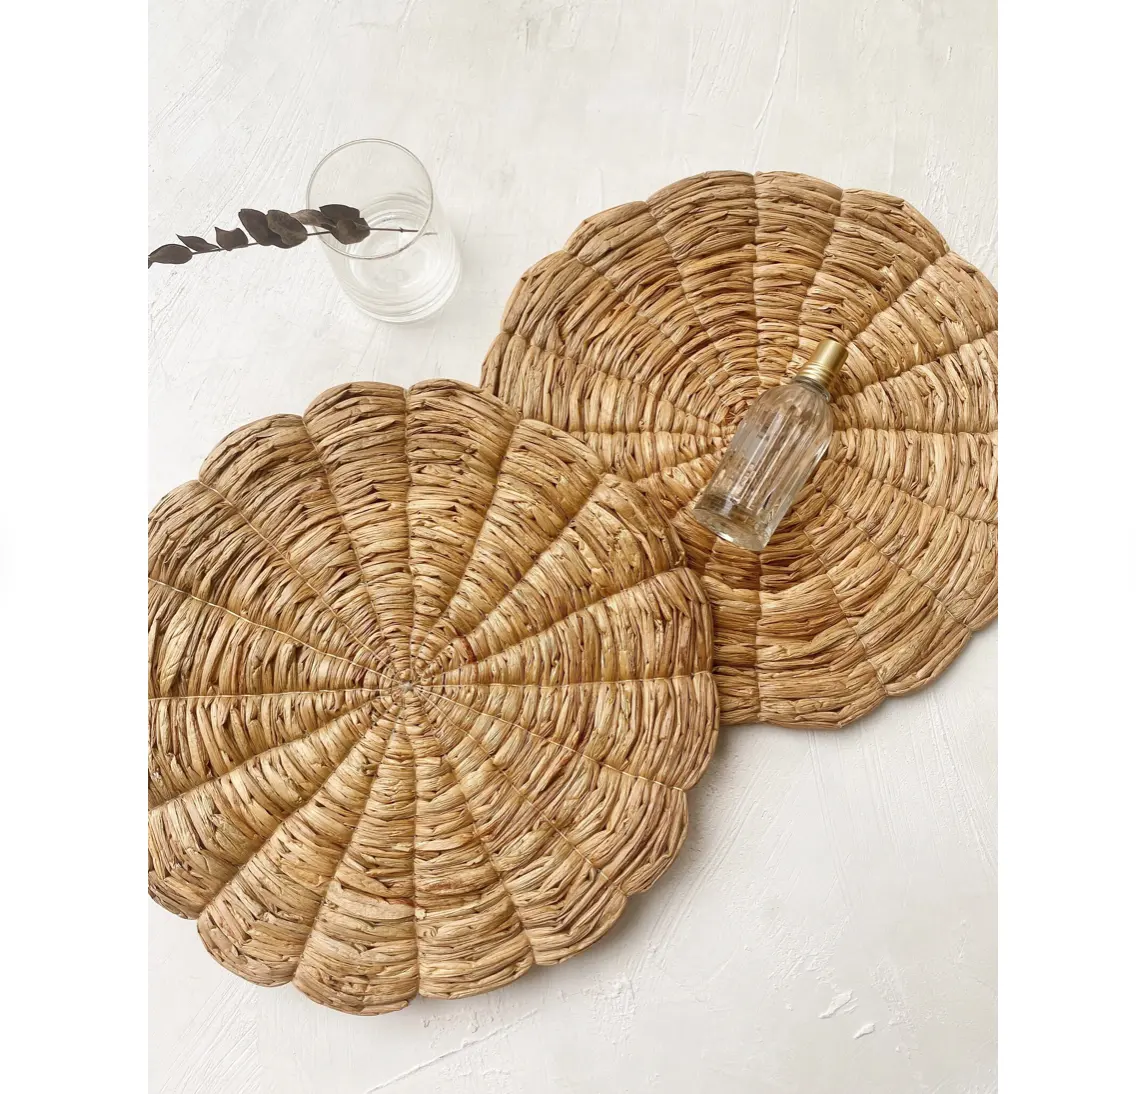 Wholesale Amazon Round Shape House Decor Vietnam Handmade Water Hyacinth Placemats for Your Kitchen